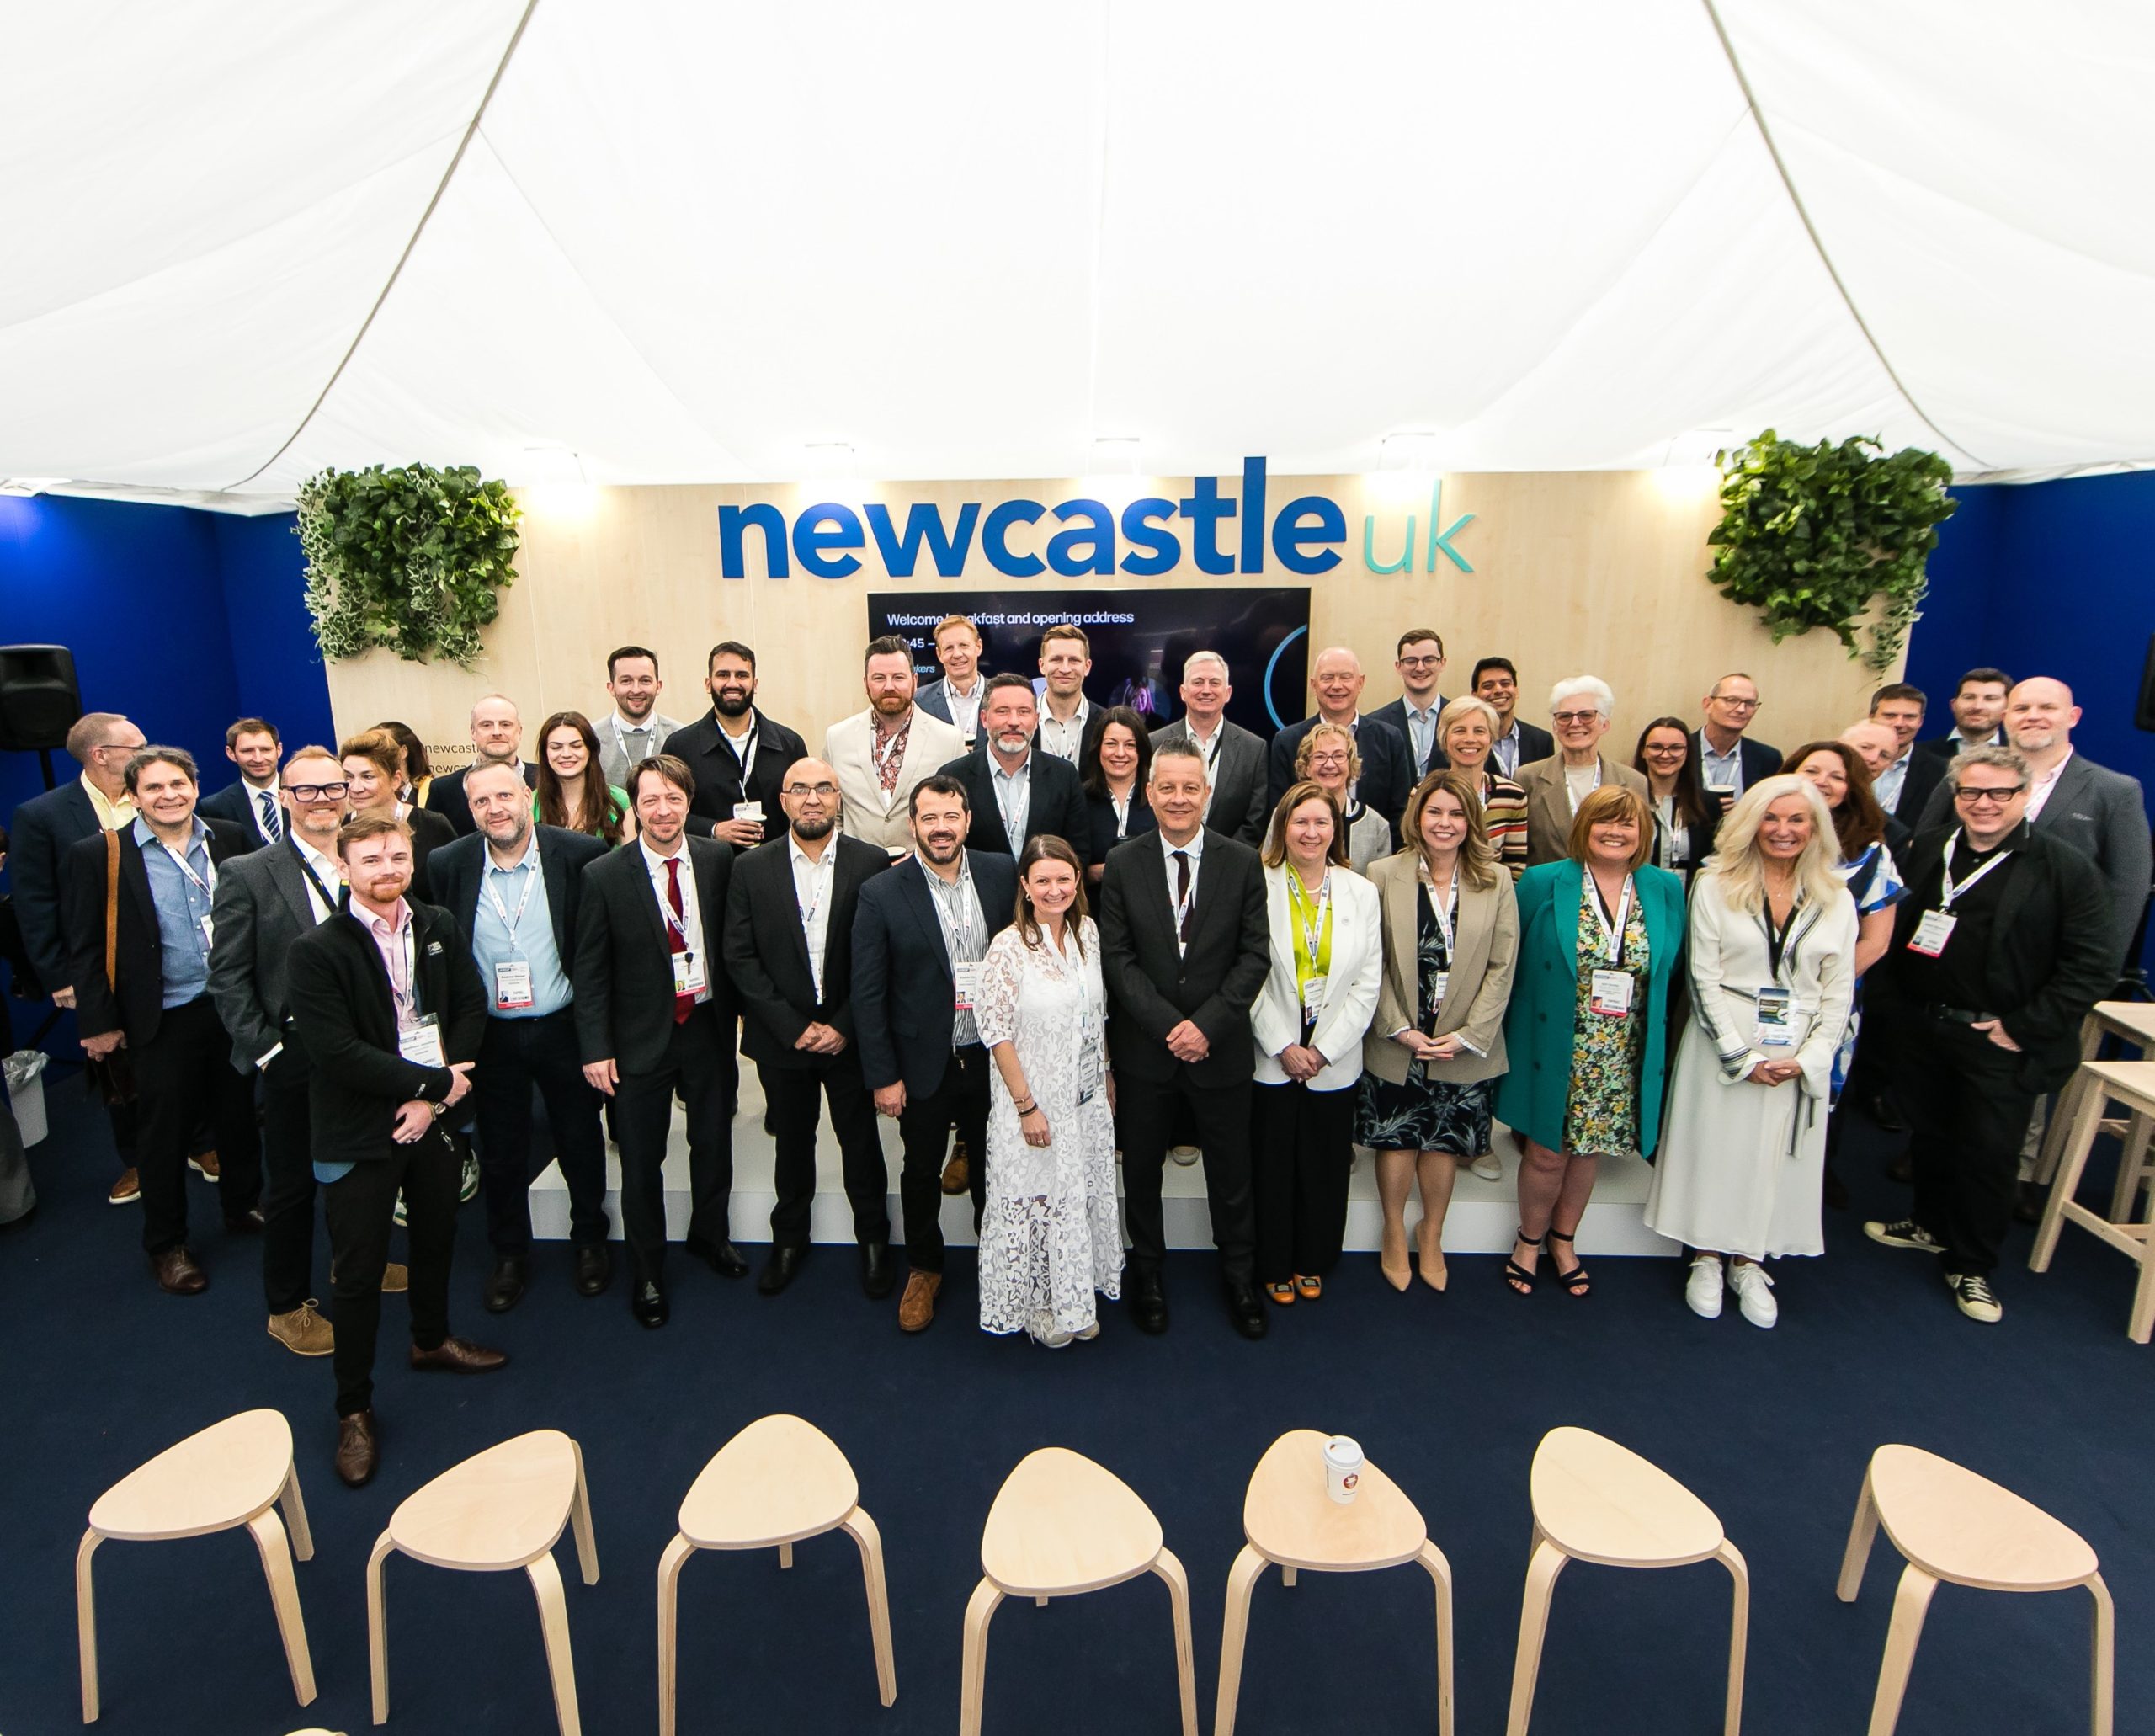 Group shot of Newcastle delegates on the Newcastle stand at UKREiIF